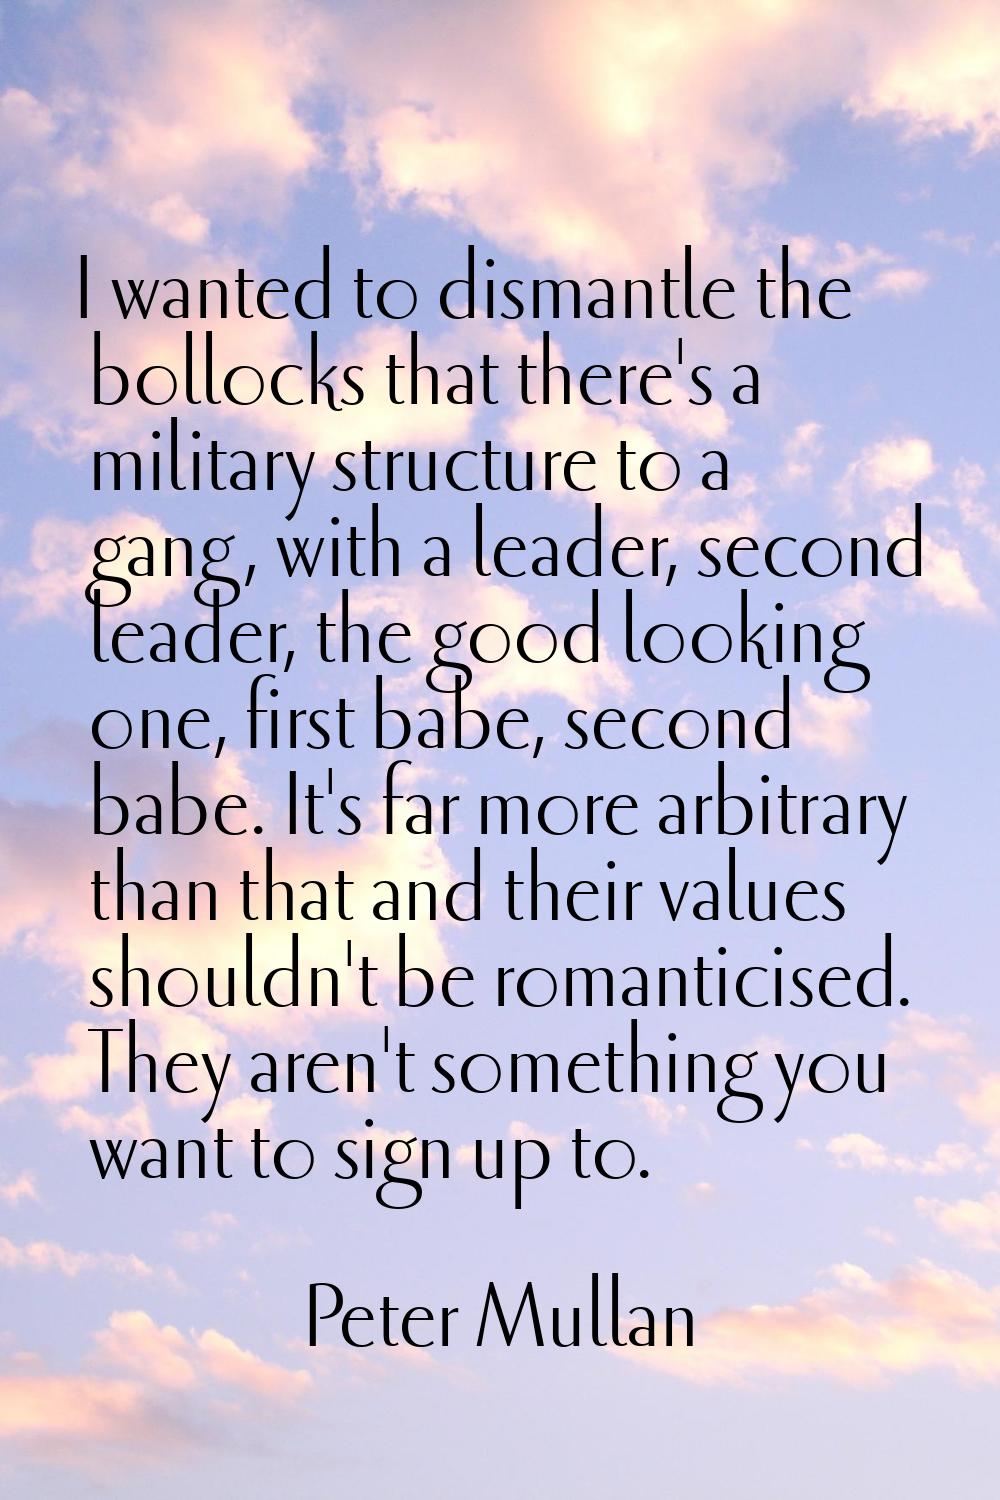 I wanted to dismantle the bollocks that there's a military structure to a gang, with a leader, seco